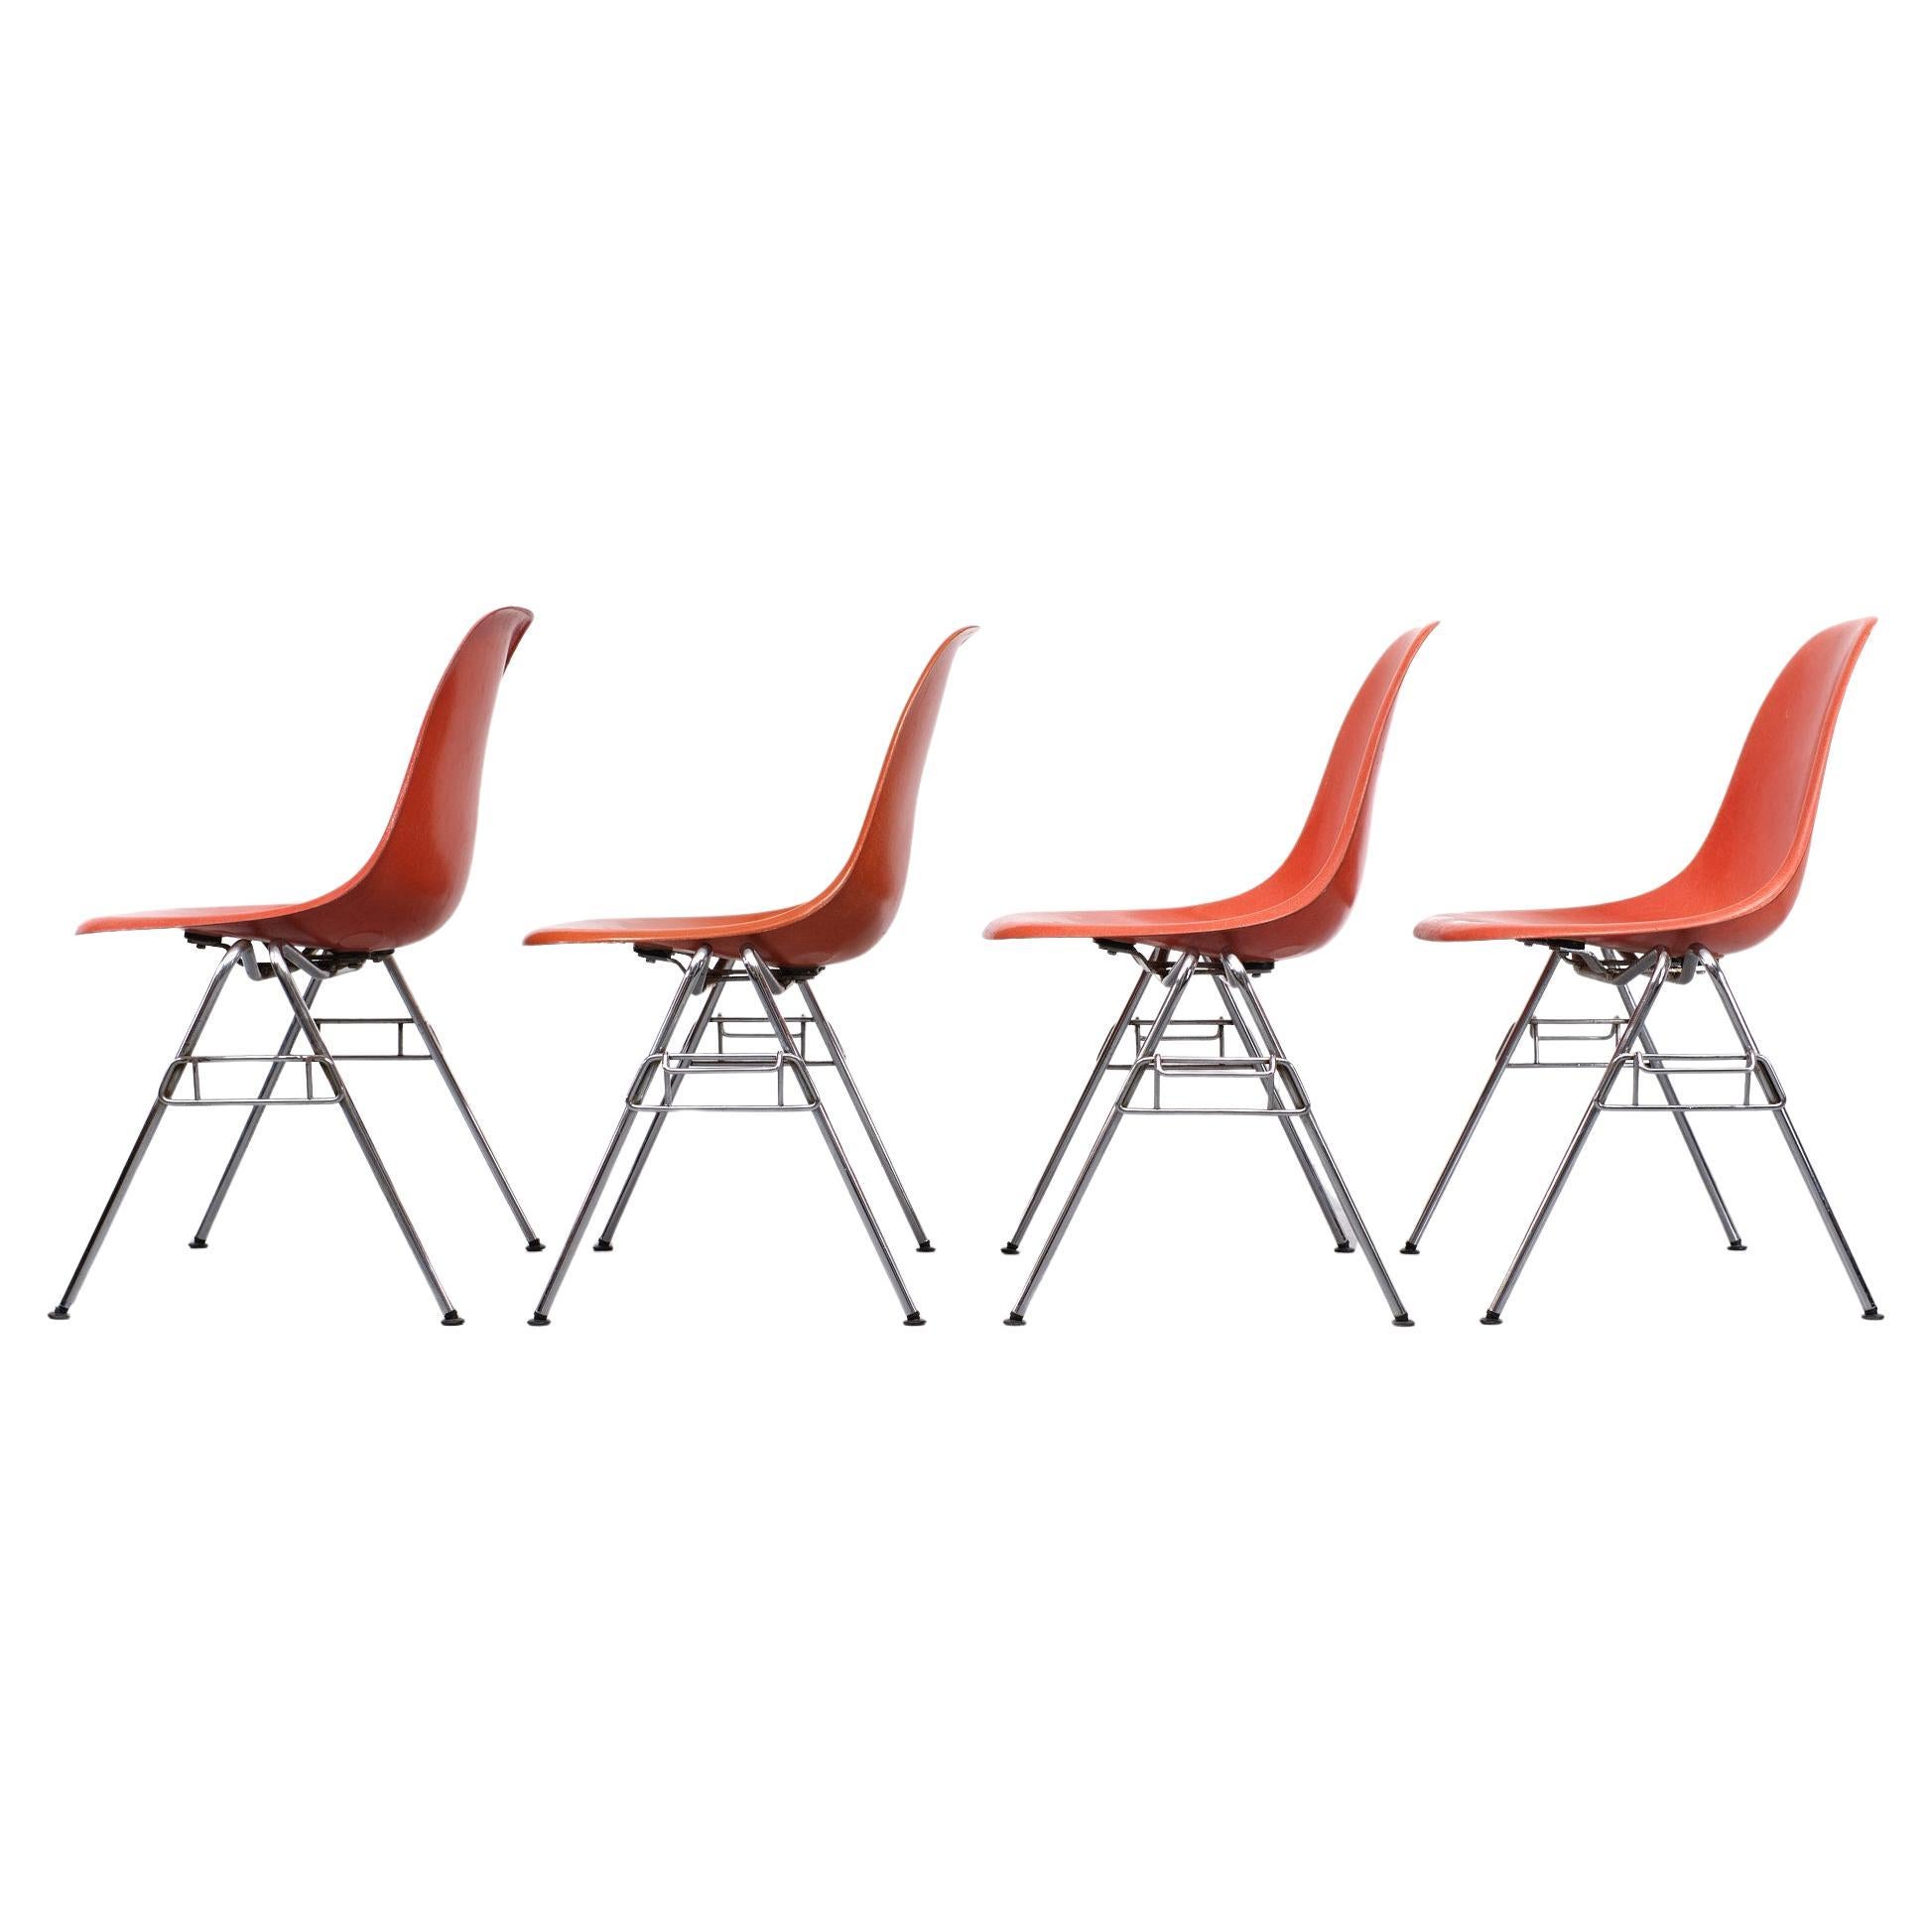 4 DSS glass fiber stacking chairs. Charles and Ray Eames for Herman Miller 1970s. 
Nice bright Orange color. Chrome legs. Original vintage chairs. So some old repairs 
underneath the chairs. All the chairs are structural safe.